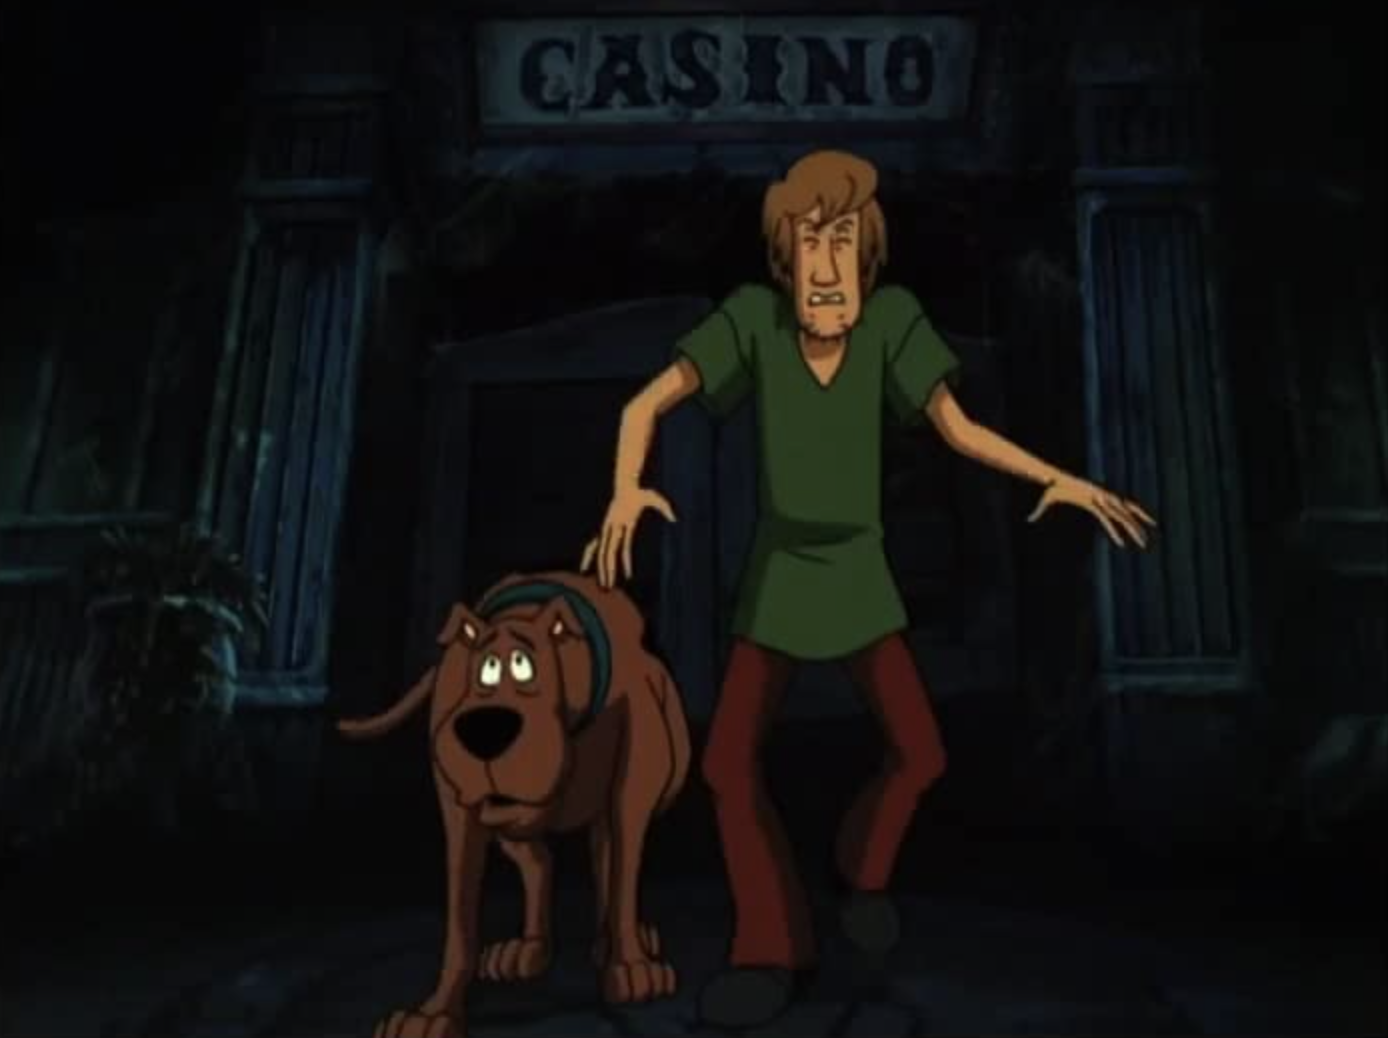 Shaggy and Scooby-Doo looking nervous while walking in the dark.